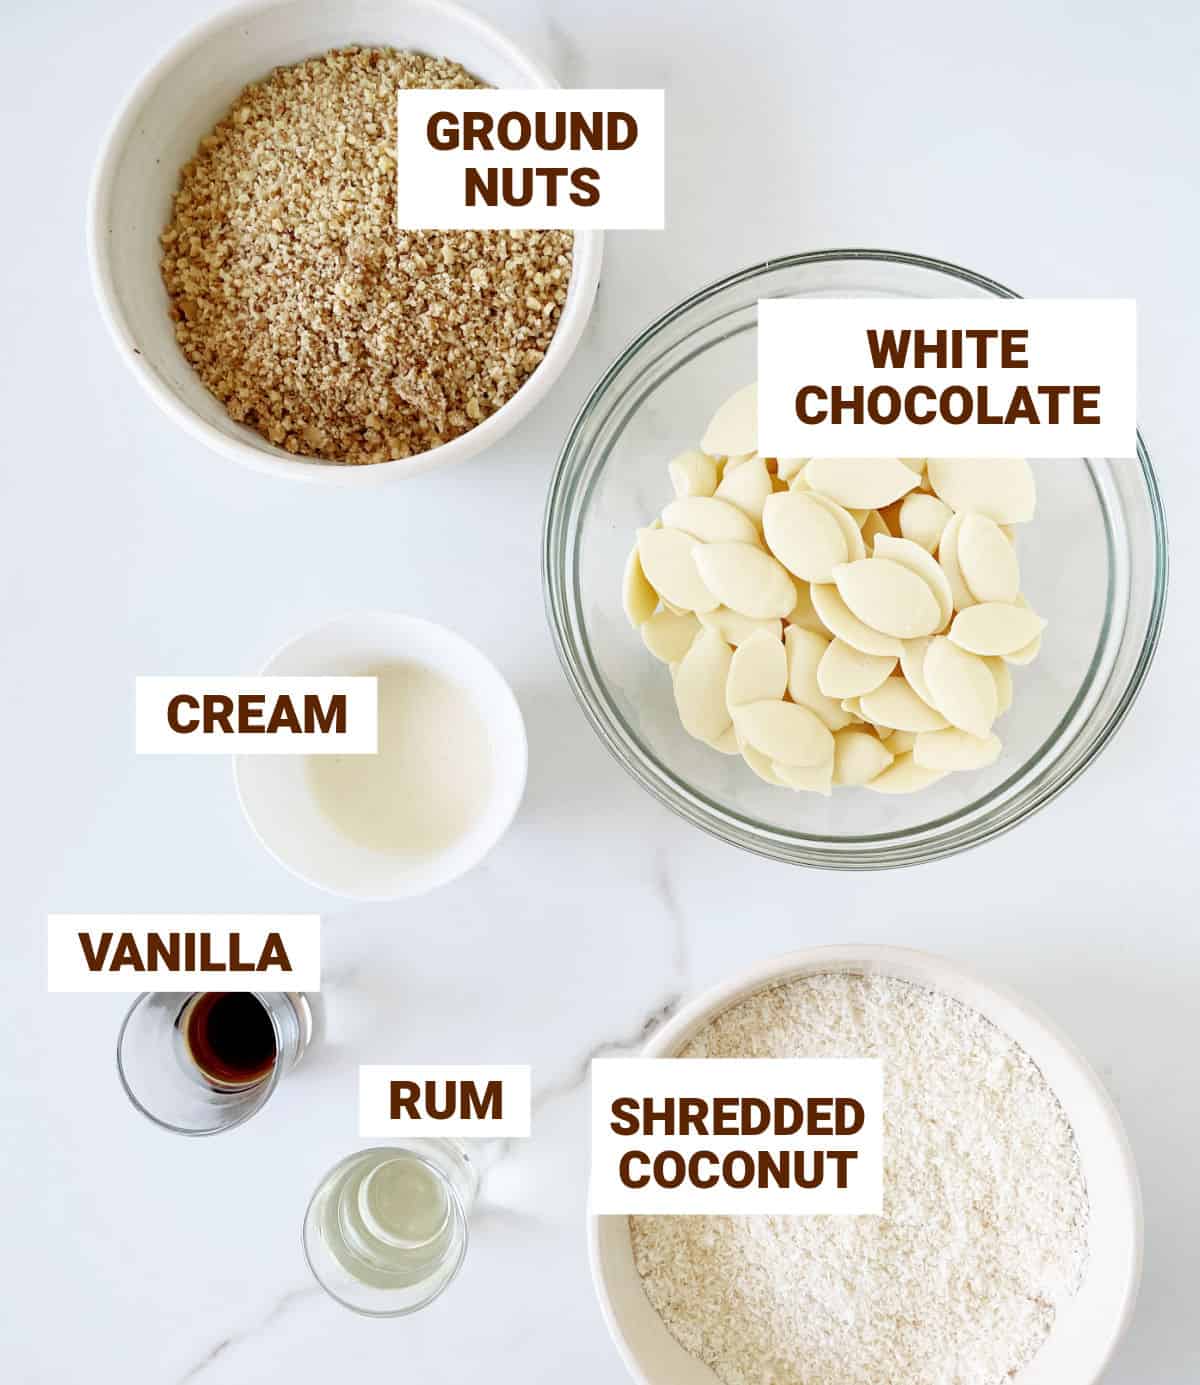 White surface with ingredients in bowls including white chocolate, nuts, coconut, cream, flavorings